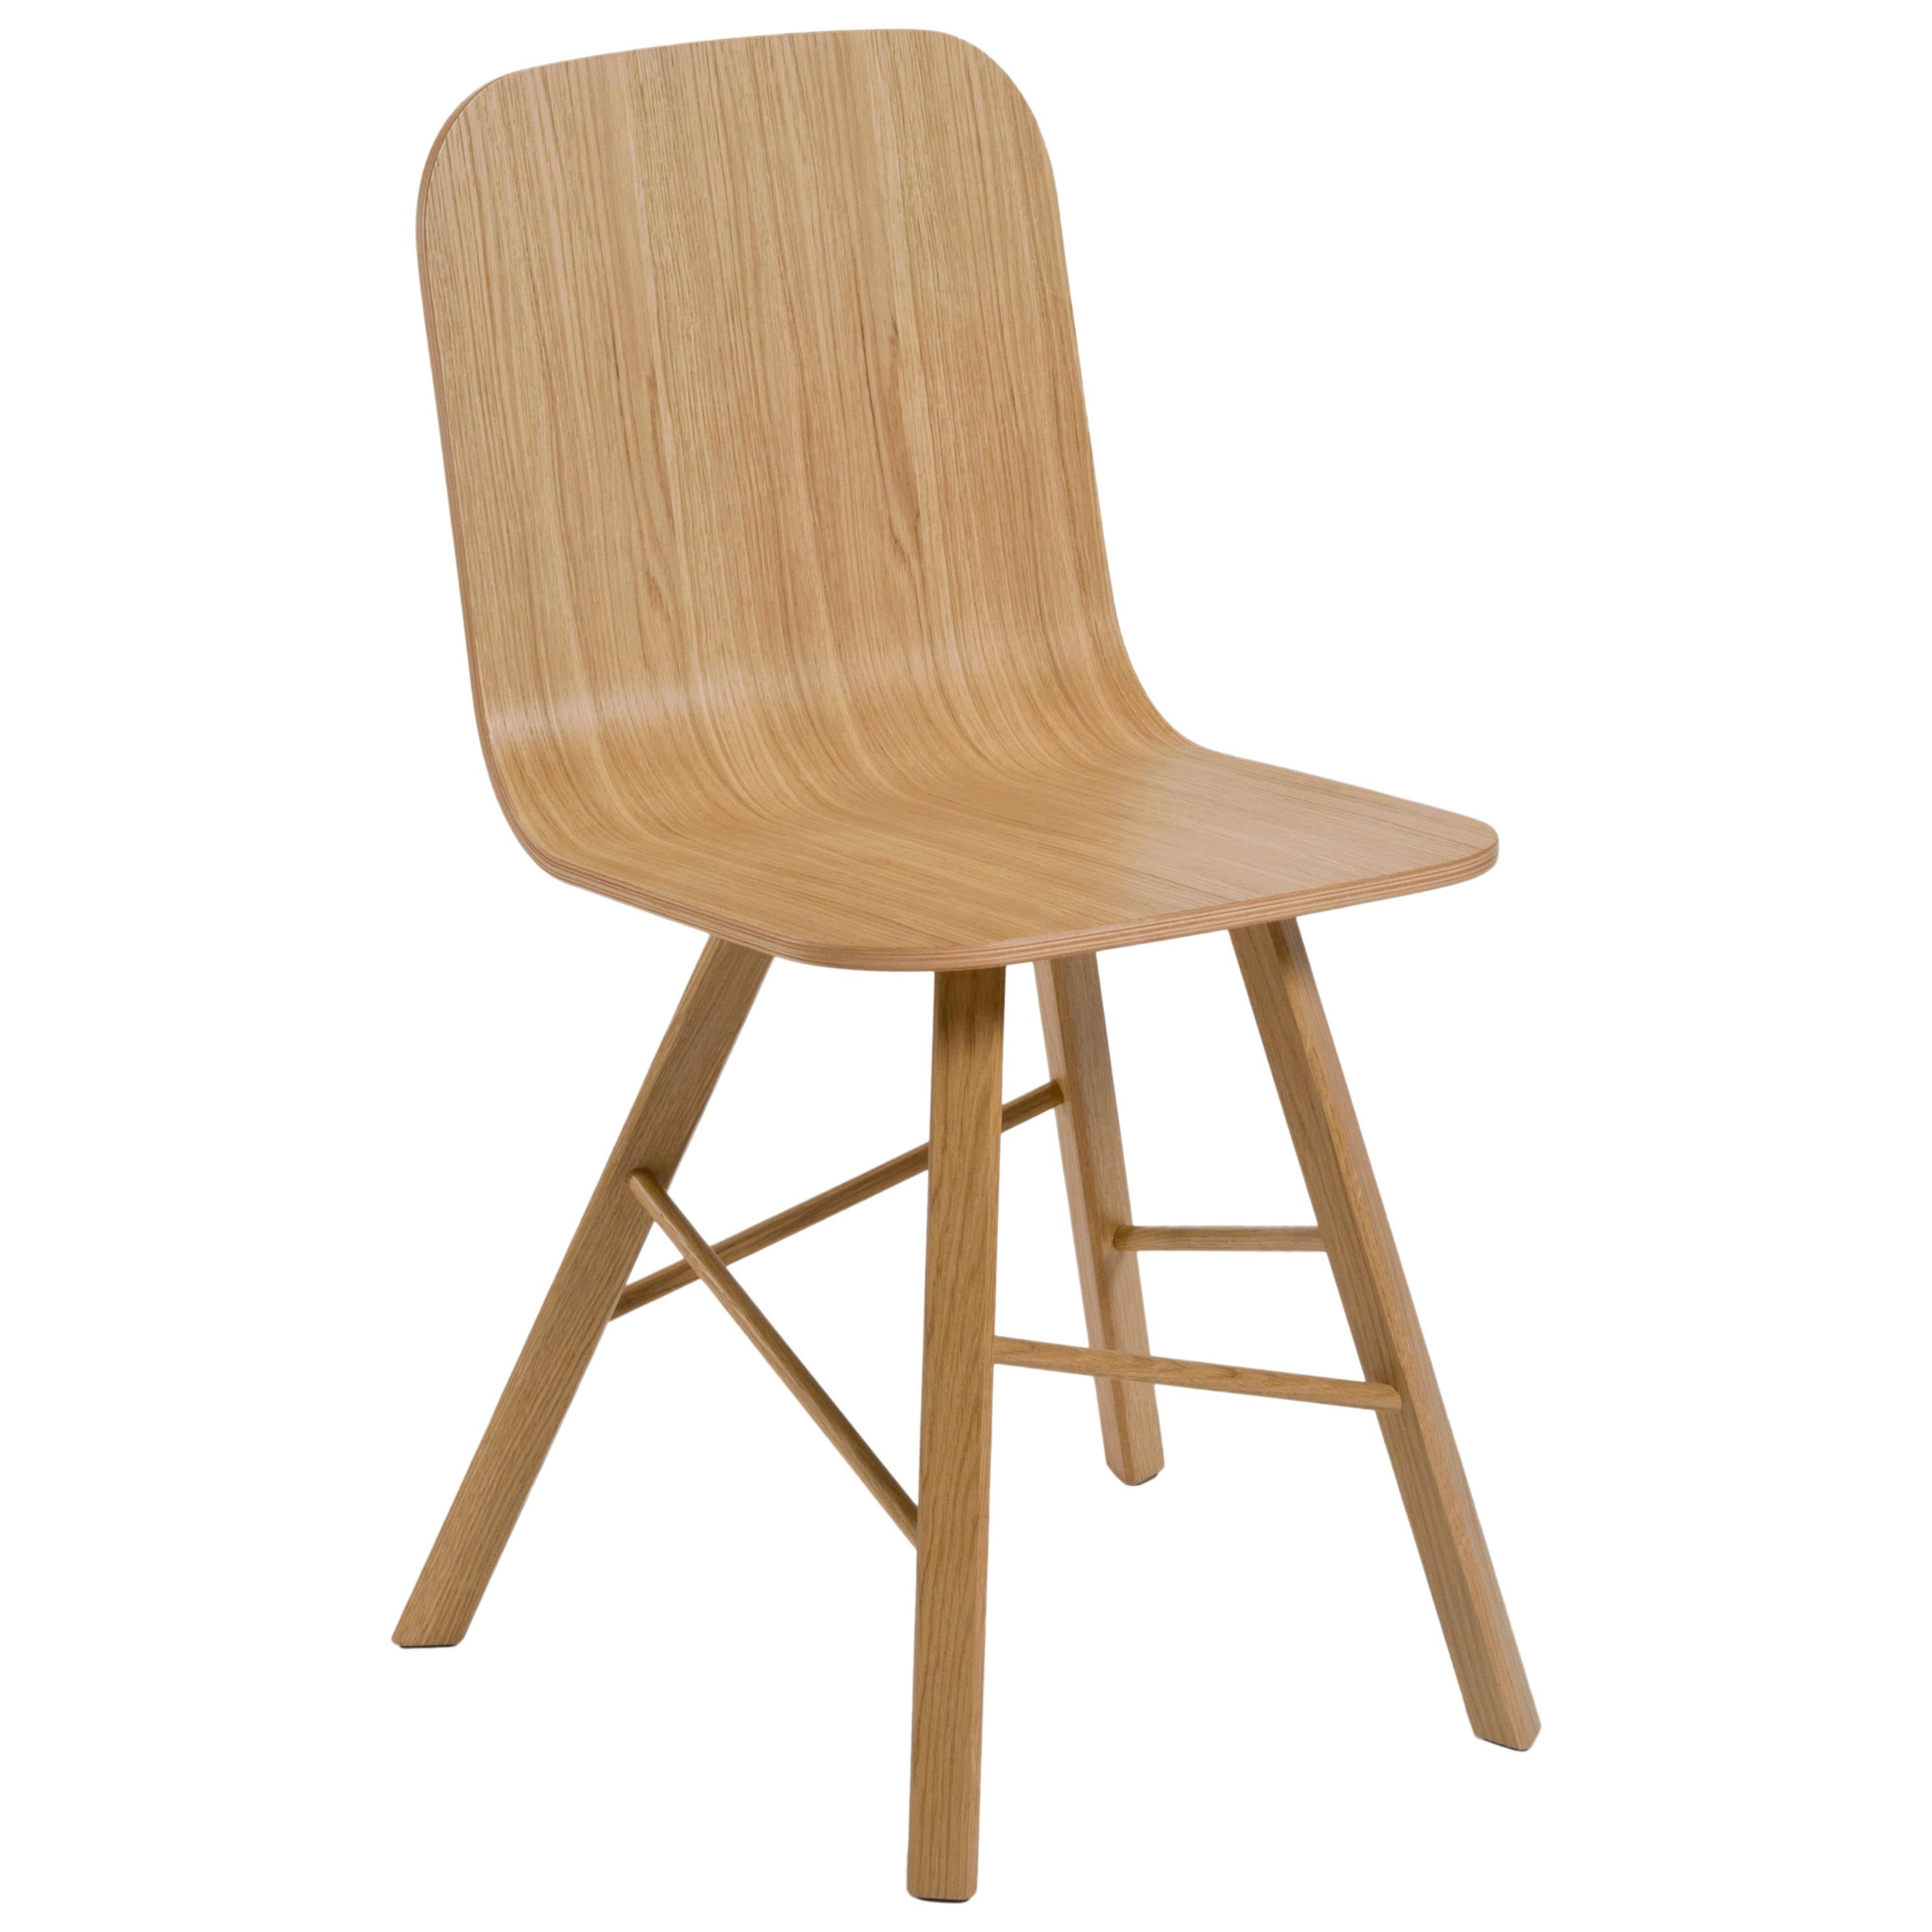 Tria Simple Chair Oak by Colé, Minimalist Design Icon Inspired to Graphic Art